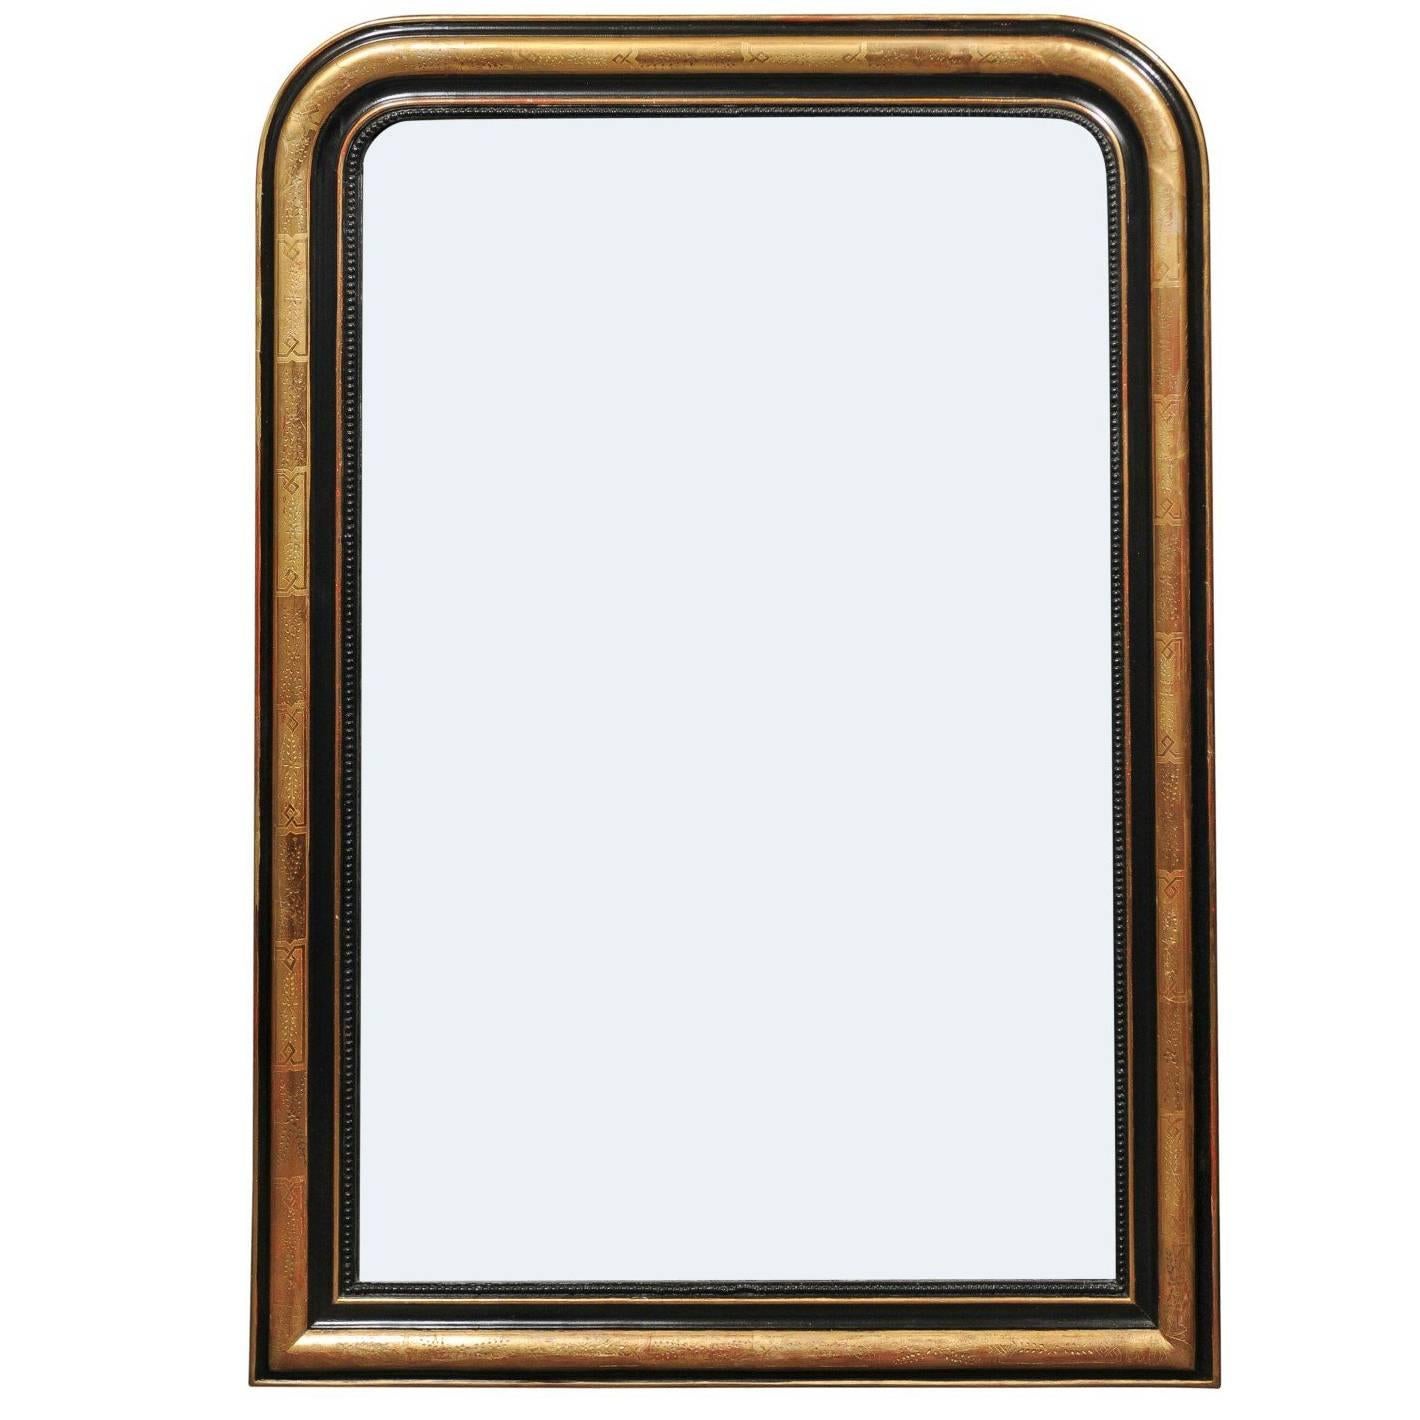 French Louis-Philippe Style Gilt and Ebonized Wood Mirror from the 1900s